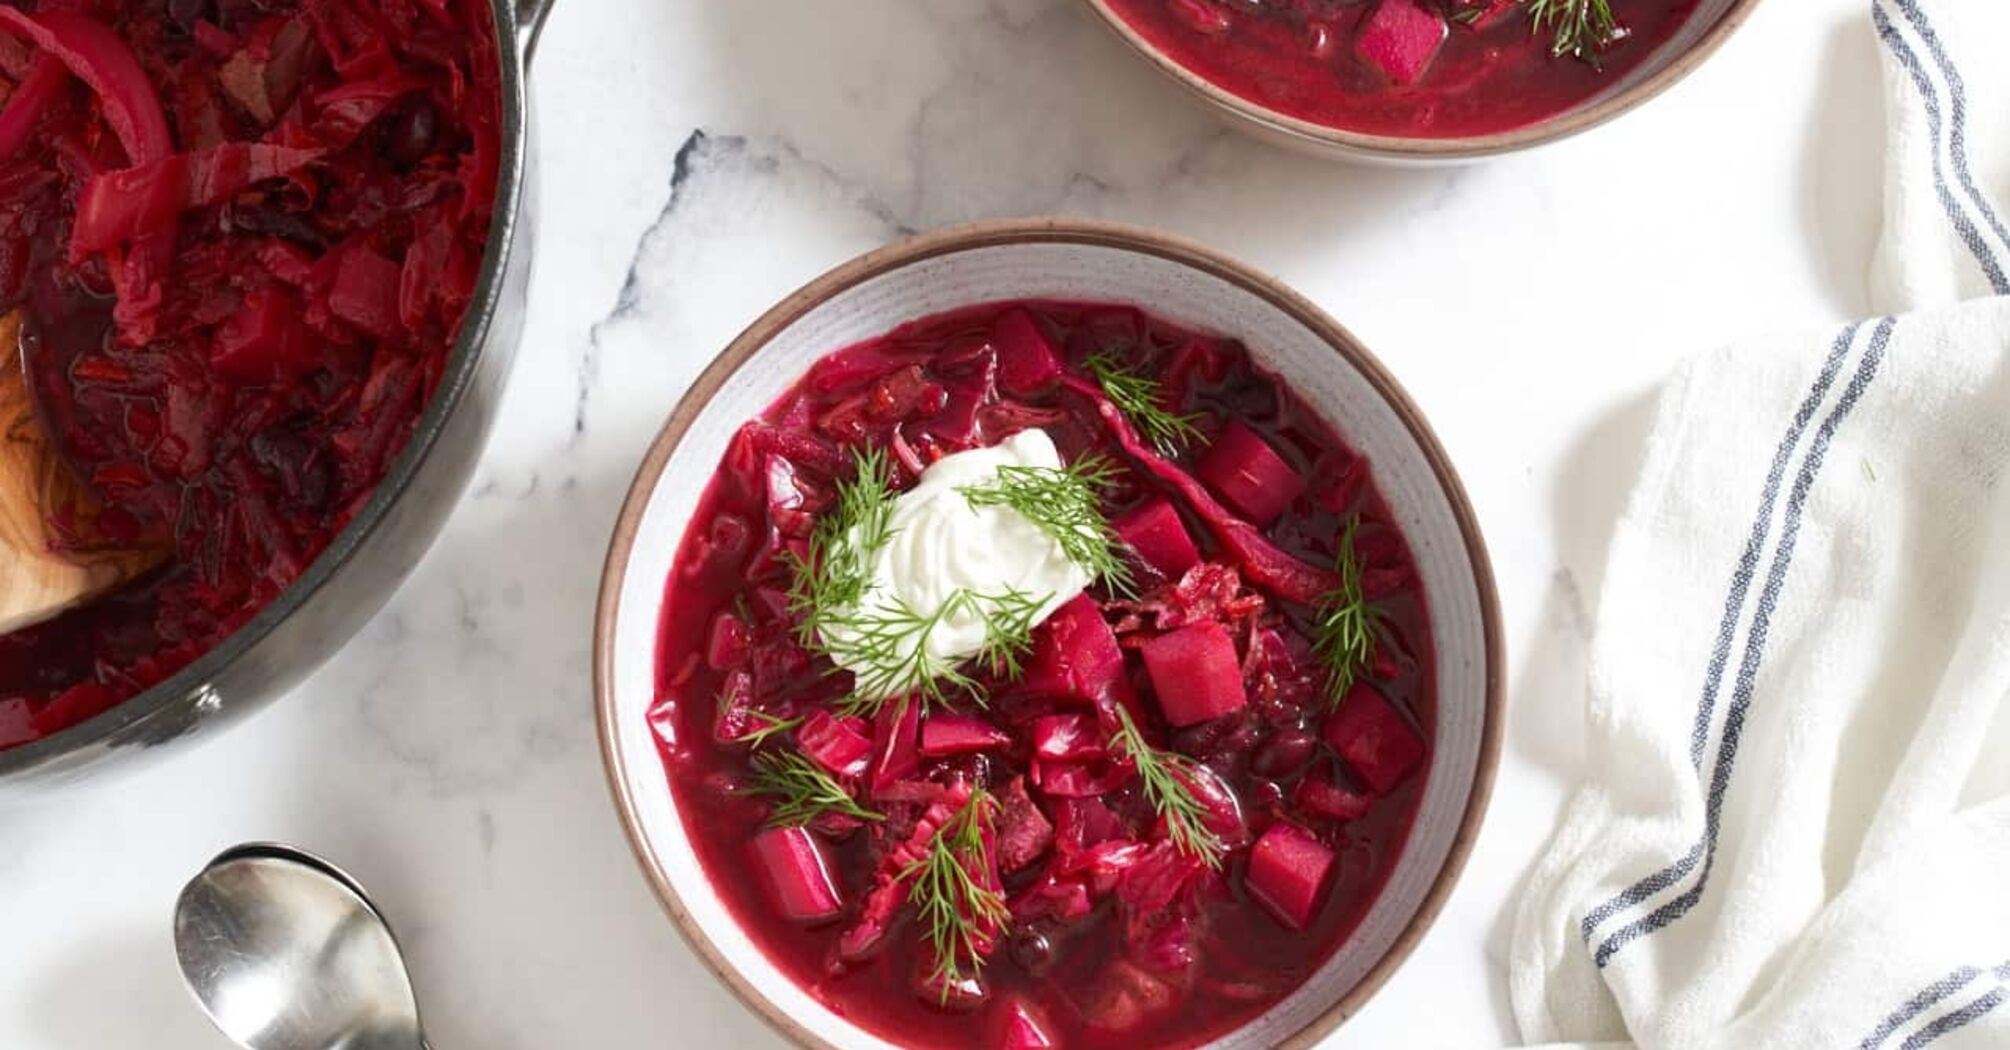 How long can borscht be stored in the refrigerator